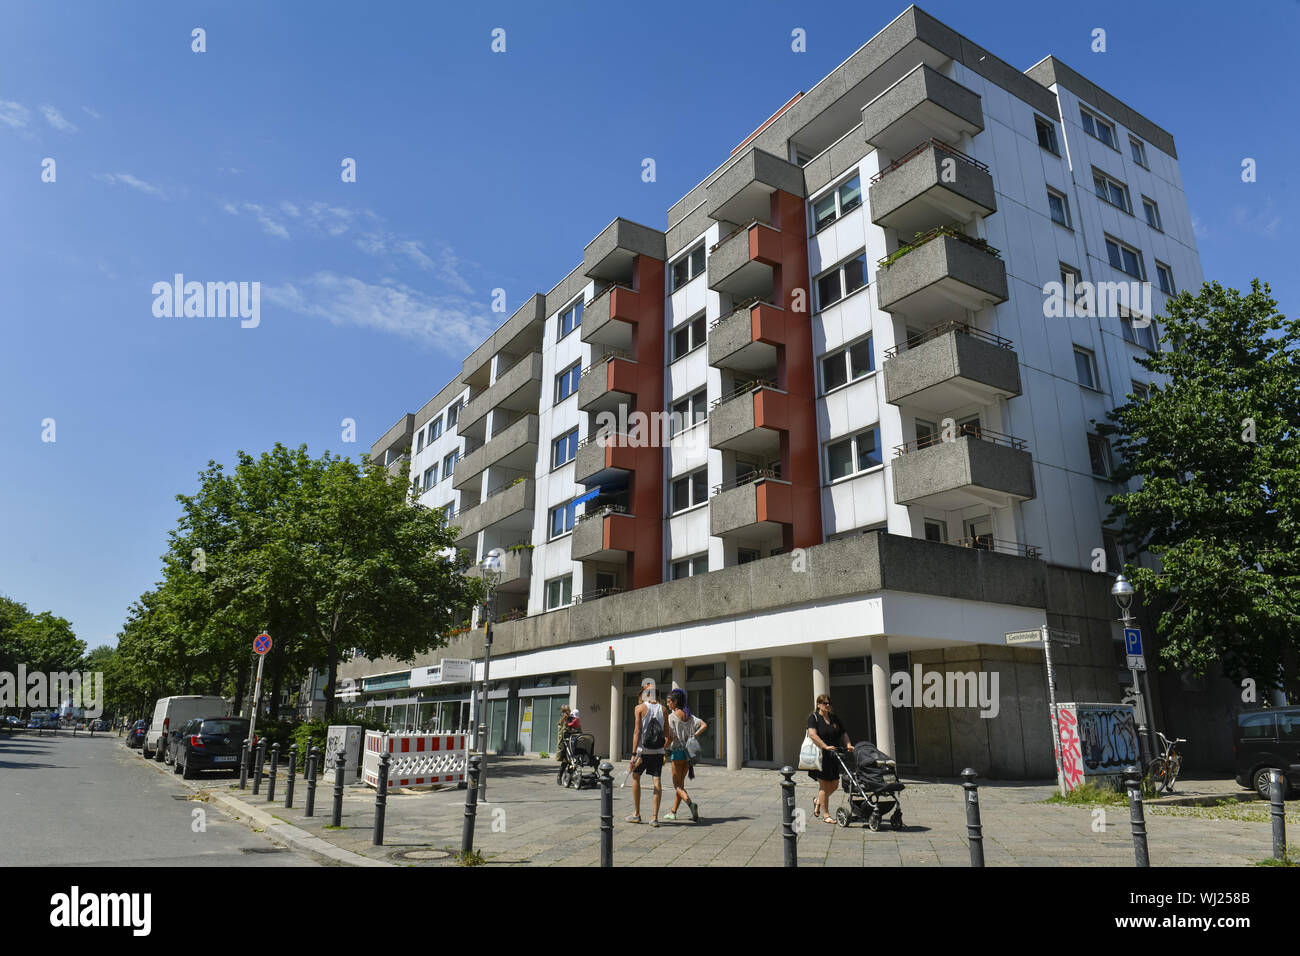 Architecture, Berlin, concrete, cheap, Germany, dirtily, building, building, Gerichtstrasse, Gerichtstrasse, nastily, nastily, dilapidatedly, real est Stock Photo